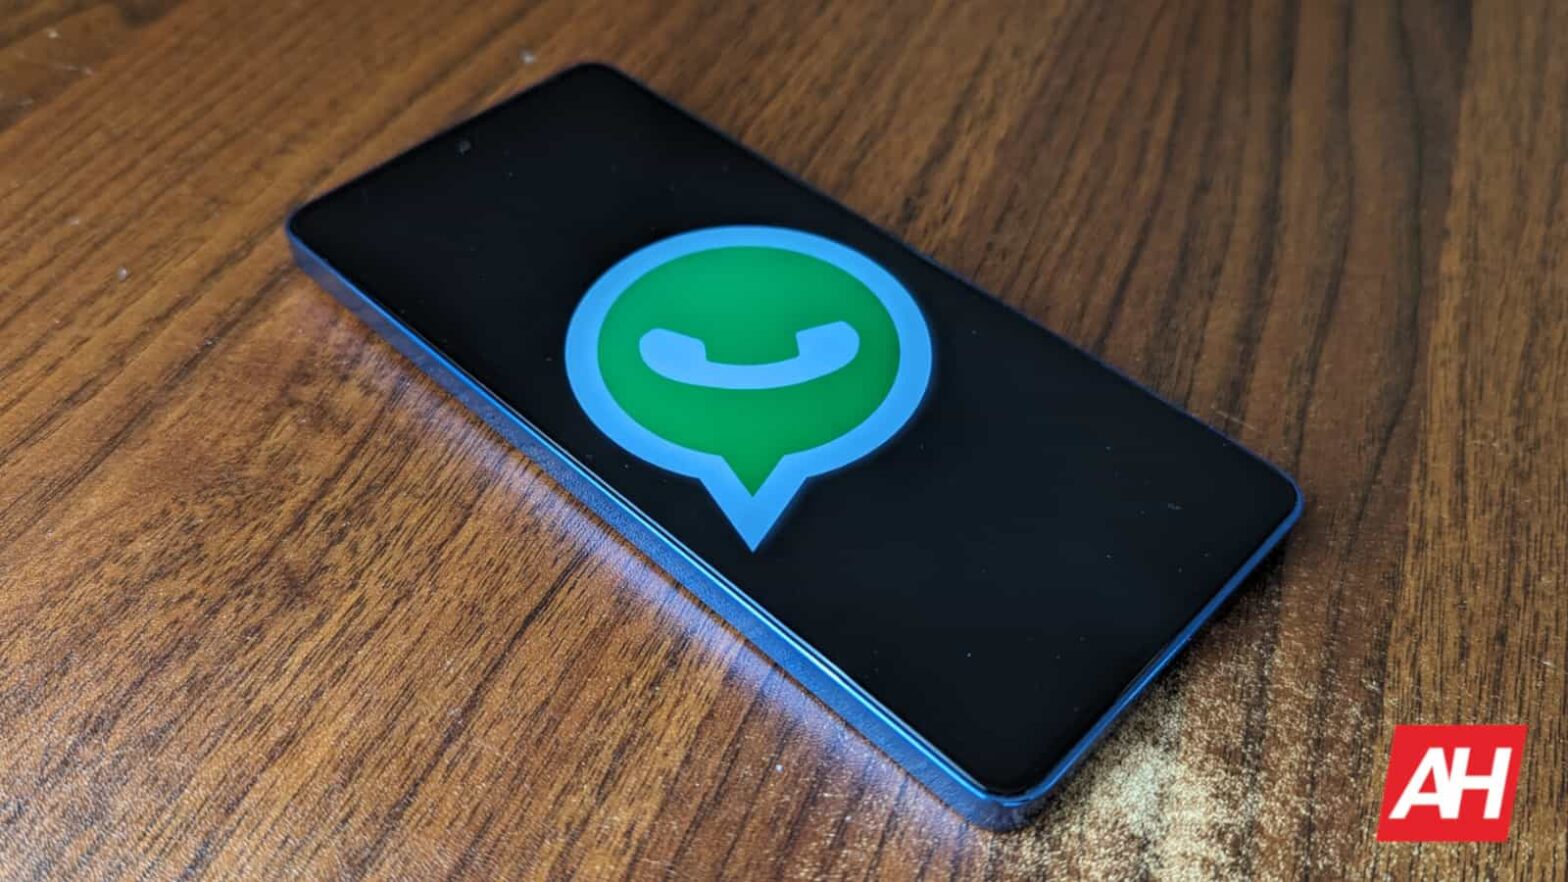 Android users can now send HD videos through WhatsApp